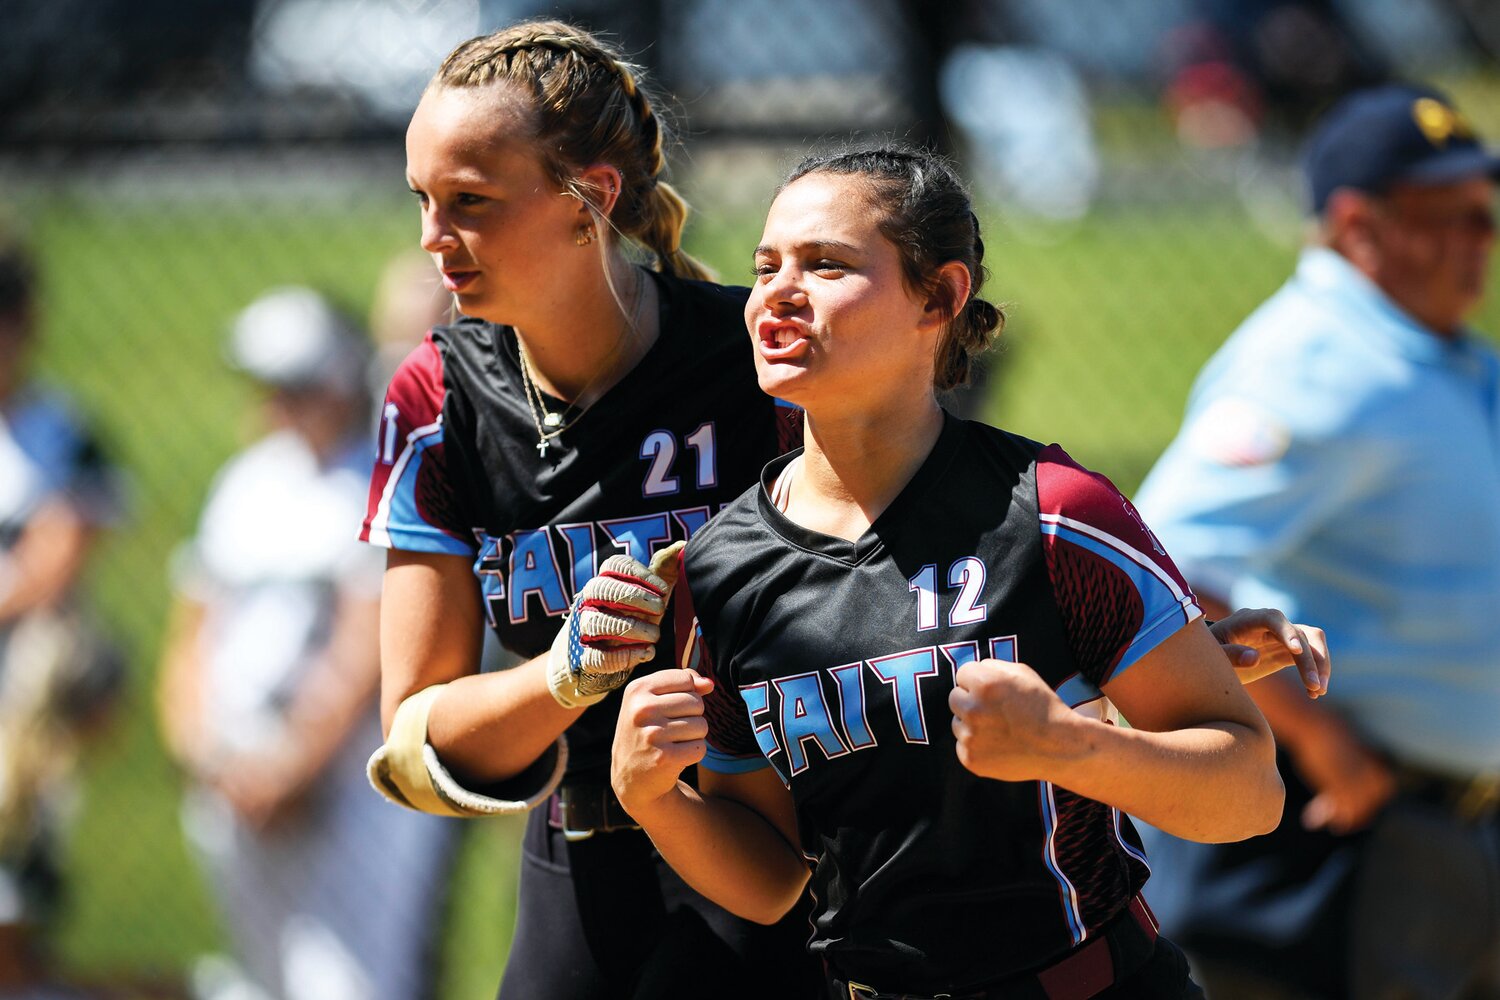 Faith Christian team captains Kamryn Pepkowski, left, and Elana Ault pumped up before the start of the game.